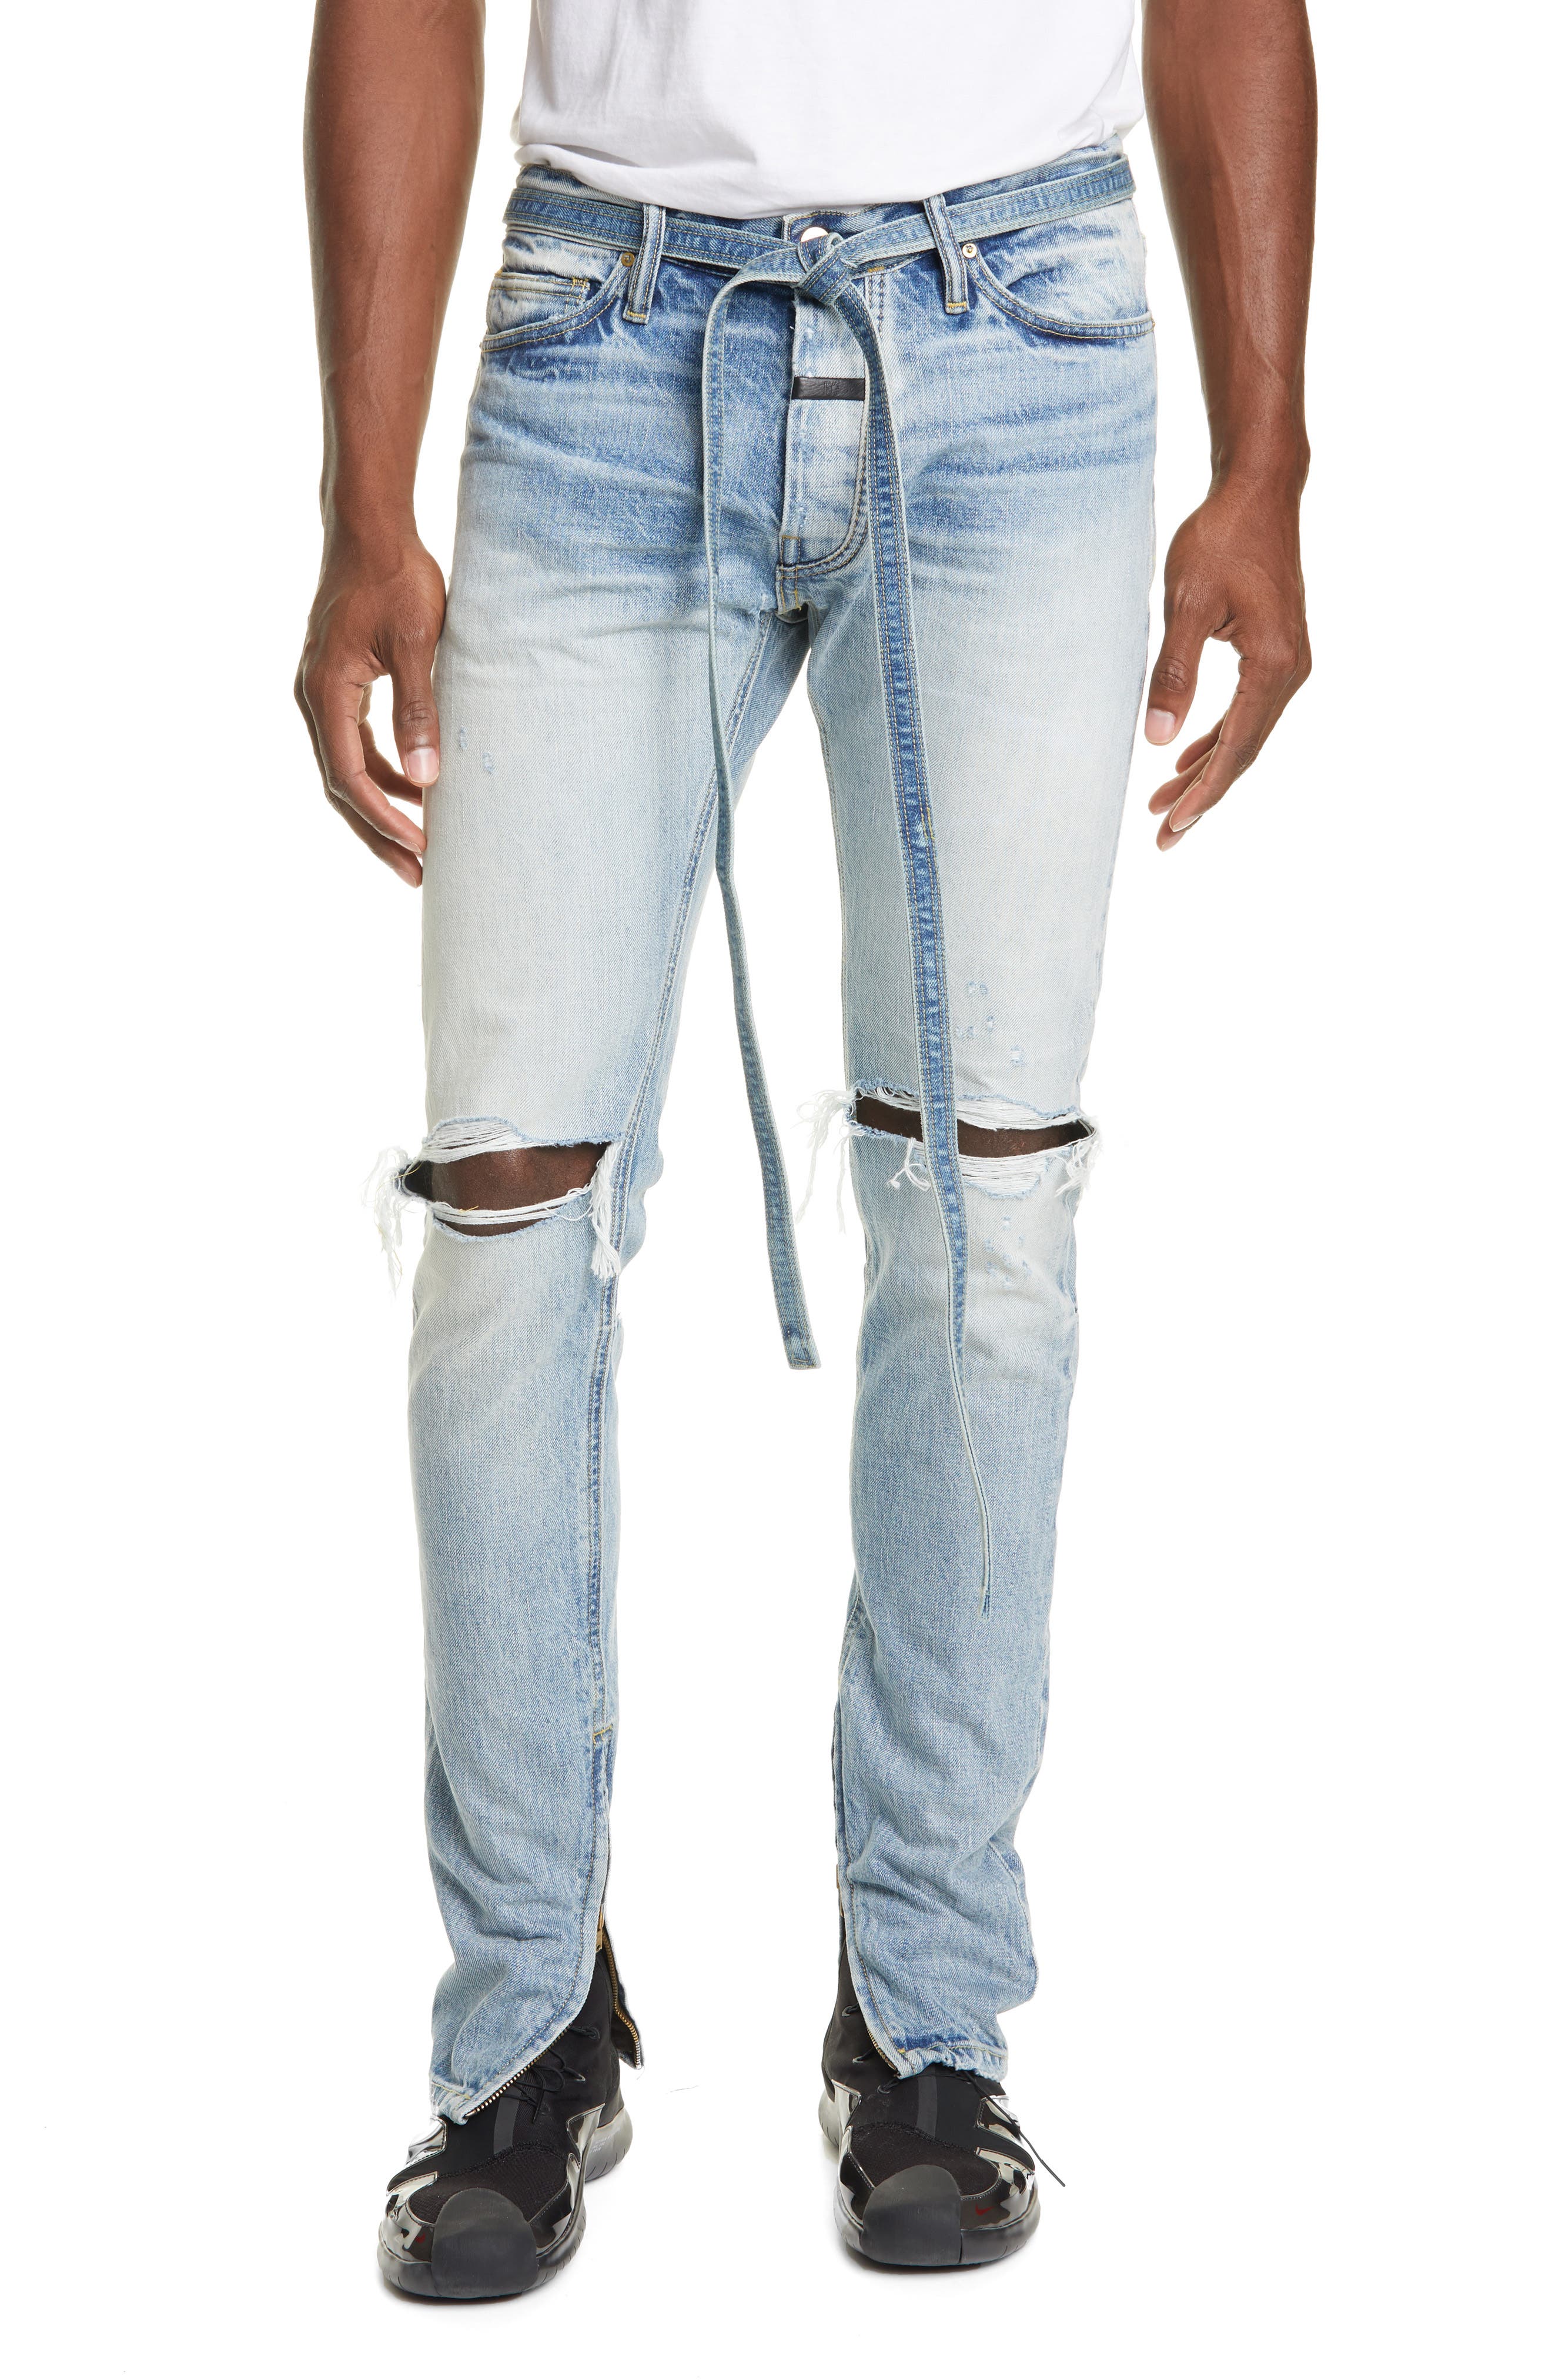 fear of god ankle zip jeans